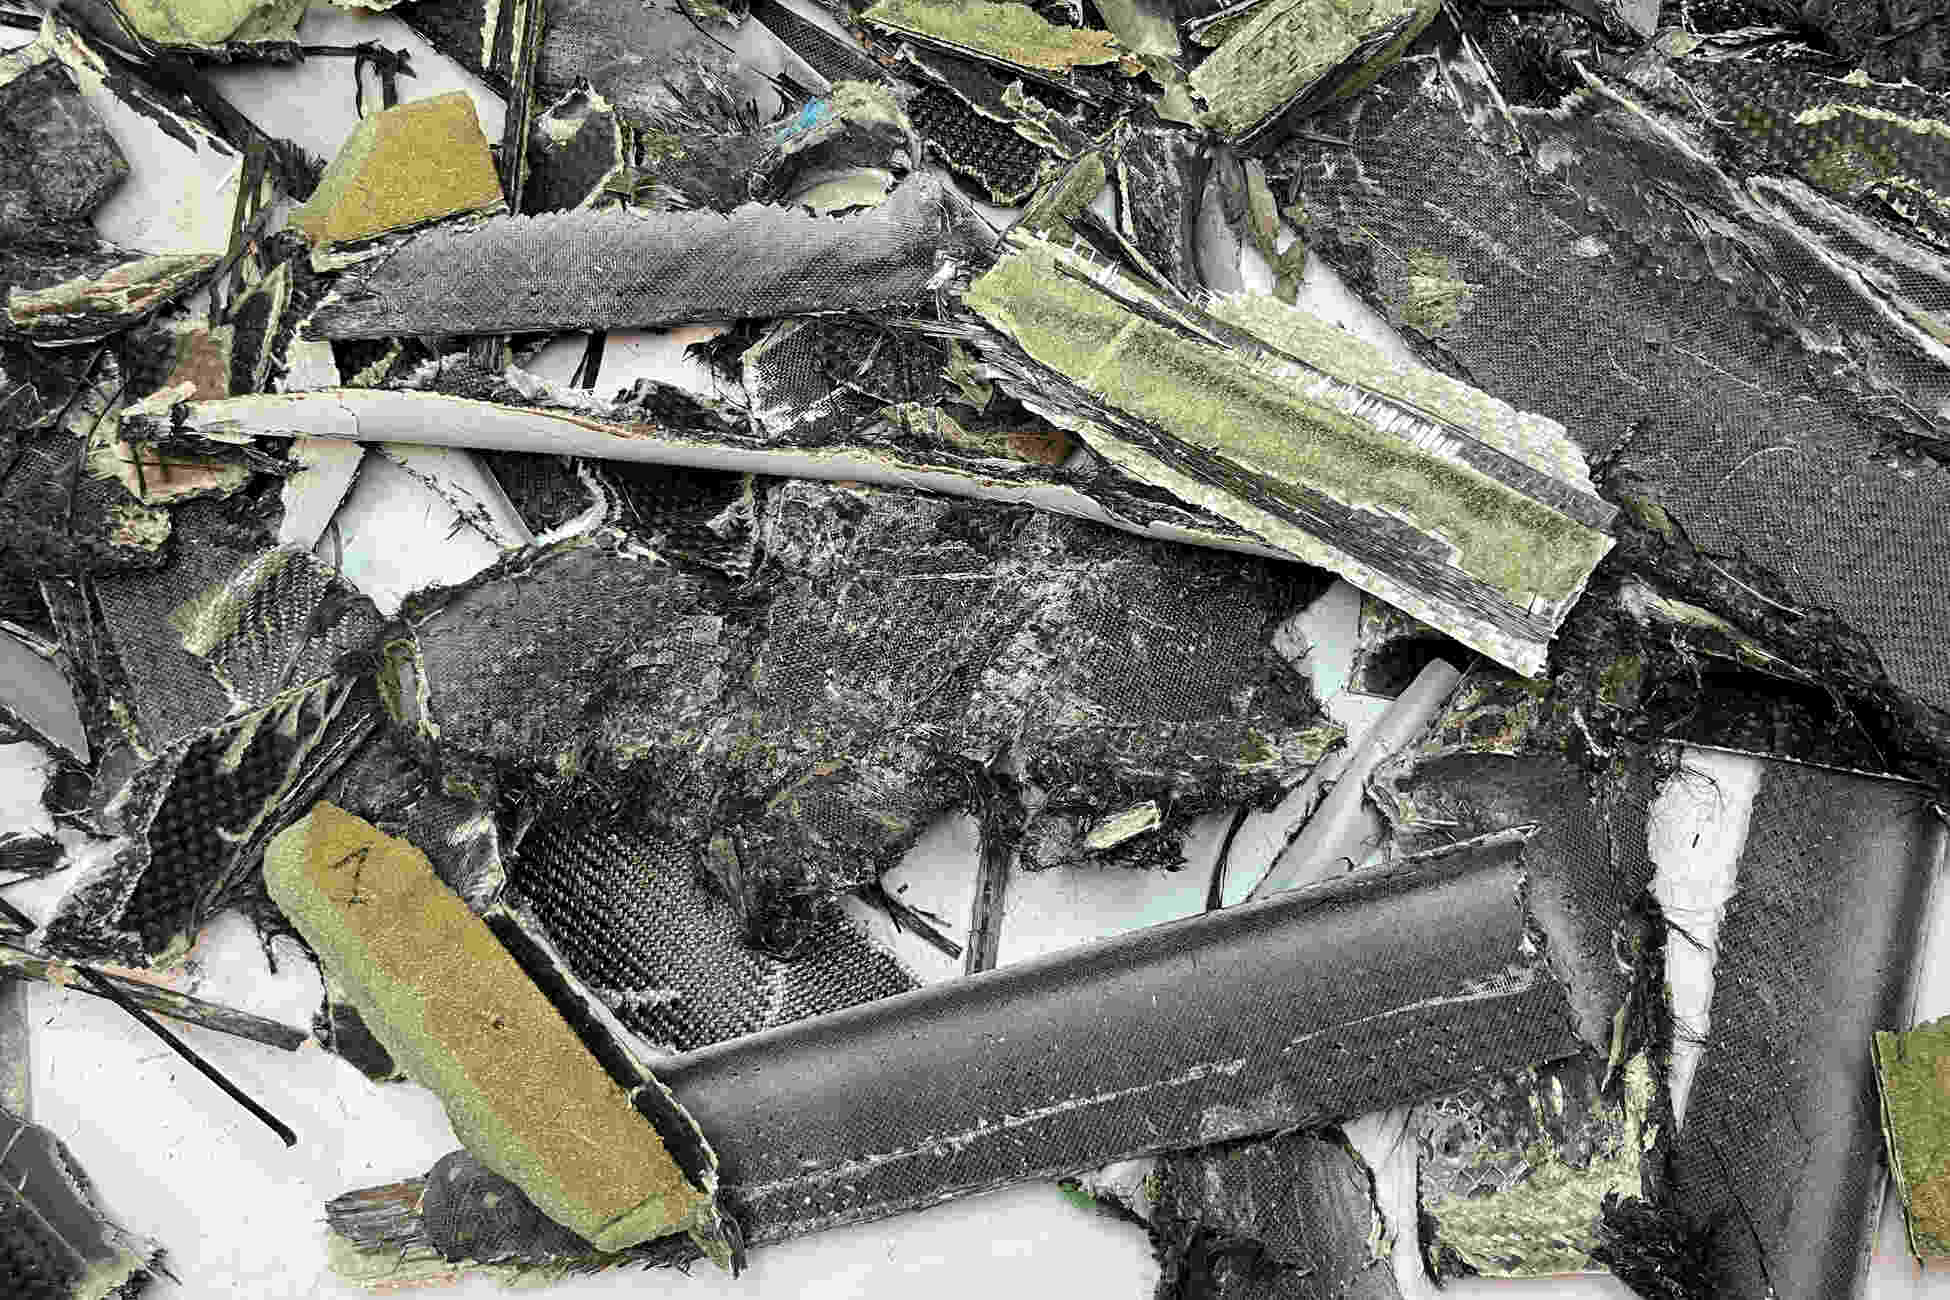 composite waste from the aviation industry